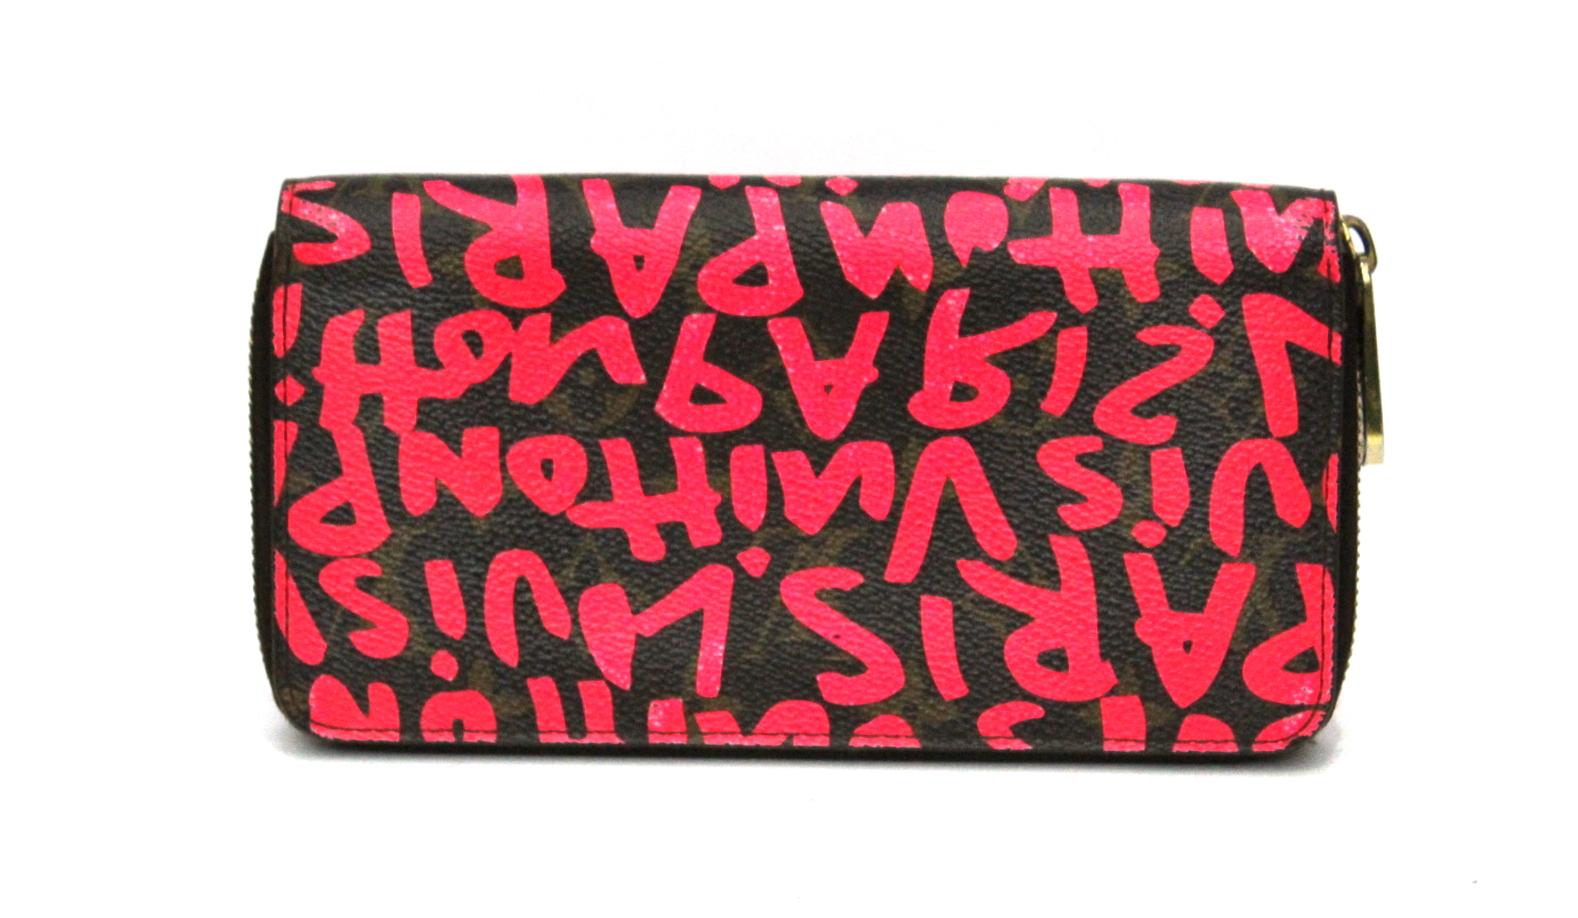  The wallet is a standard size clutch wallet crafted of classic Louis Vuitton monogram on toile canvas with an extra layer of graffiti inspired print of the Louis Vuitton name, here in neon pink (fuchsia). The wallet has a 3/4 wrap around zipper.